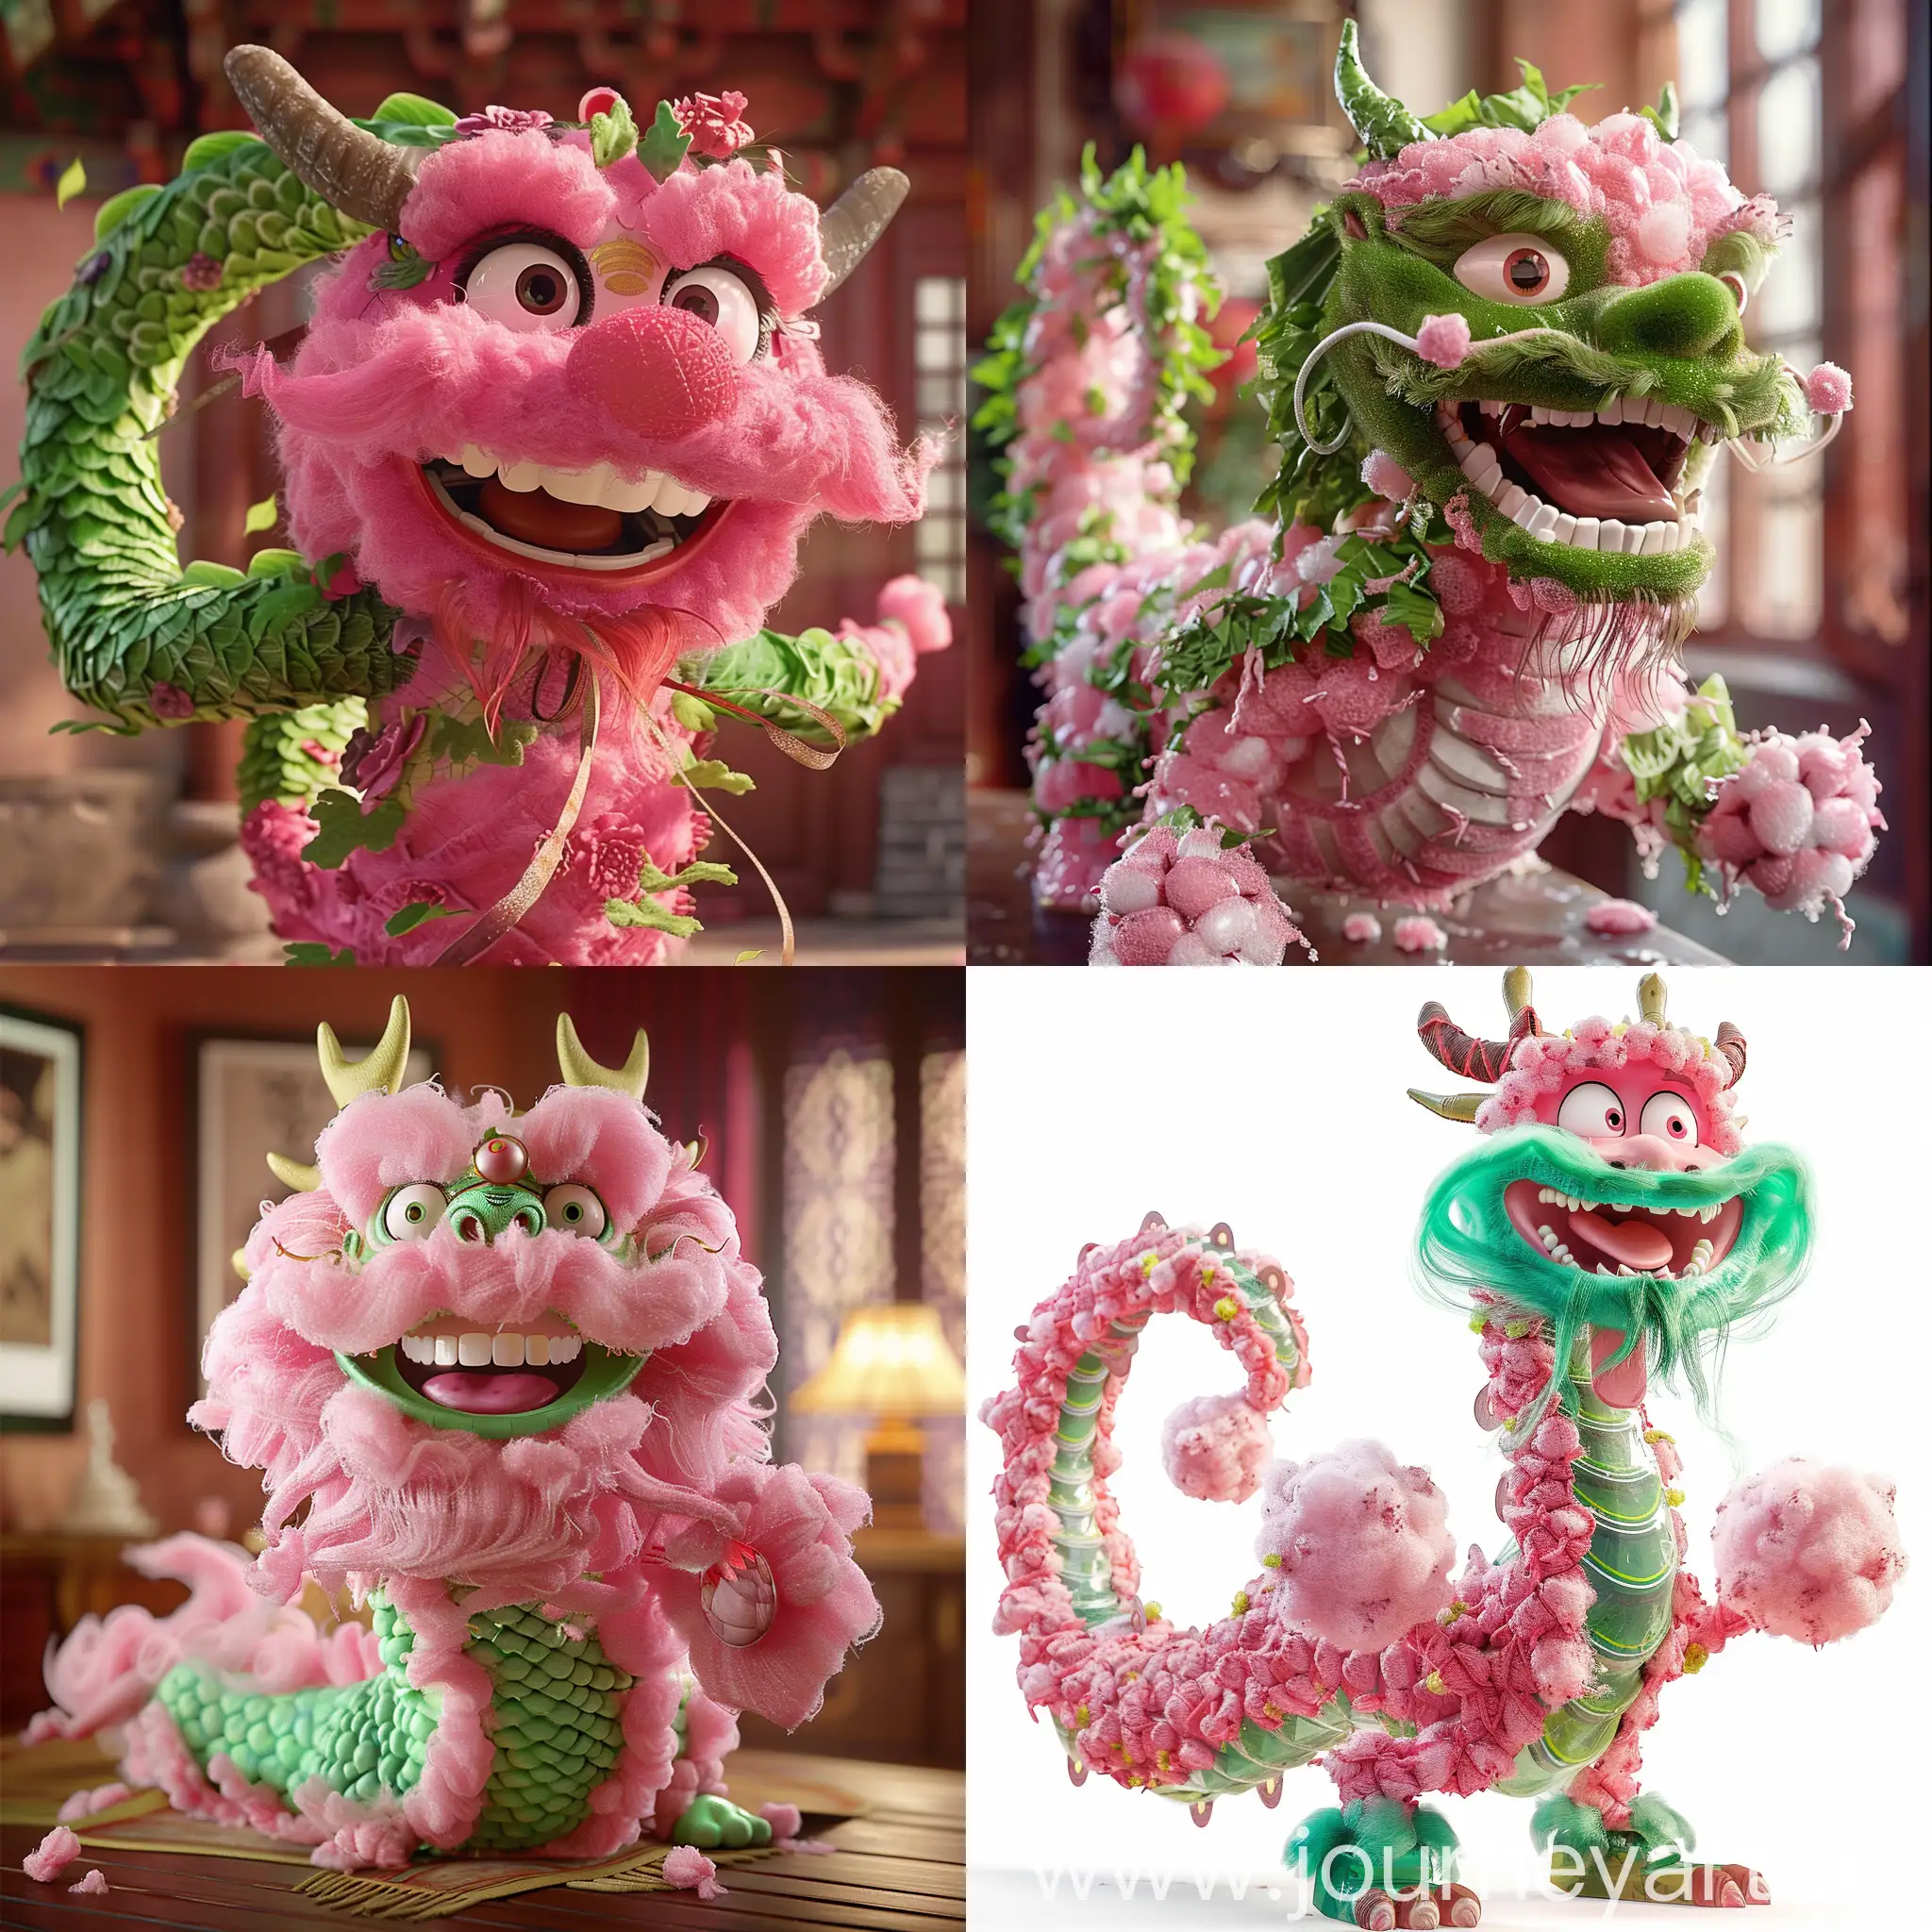 Whimsical-Pixar-Style-Pink-and-Green-Chinese-Dragon-Made-of-Cotton-Candy-Material